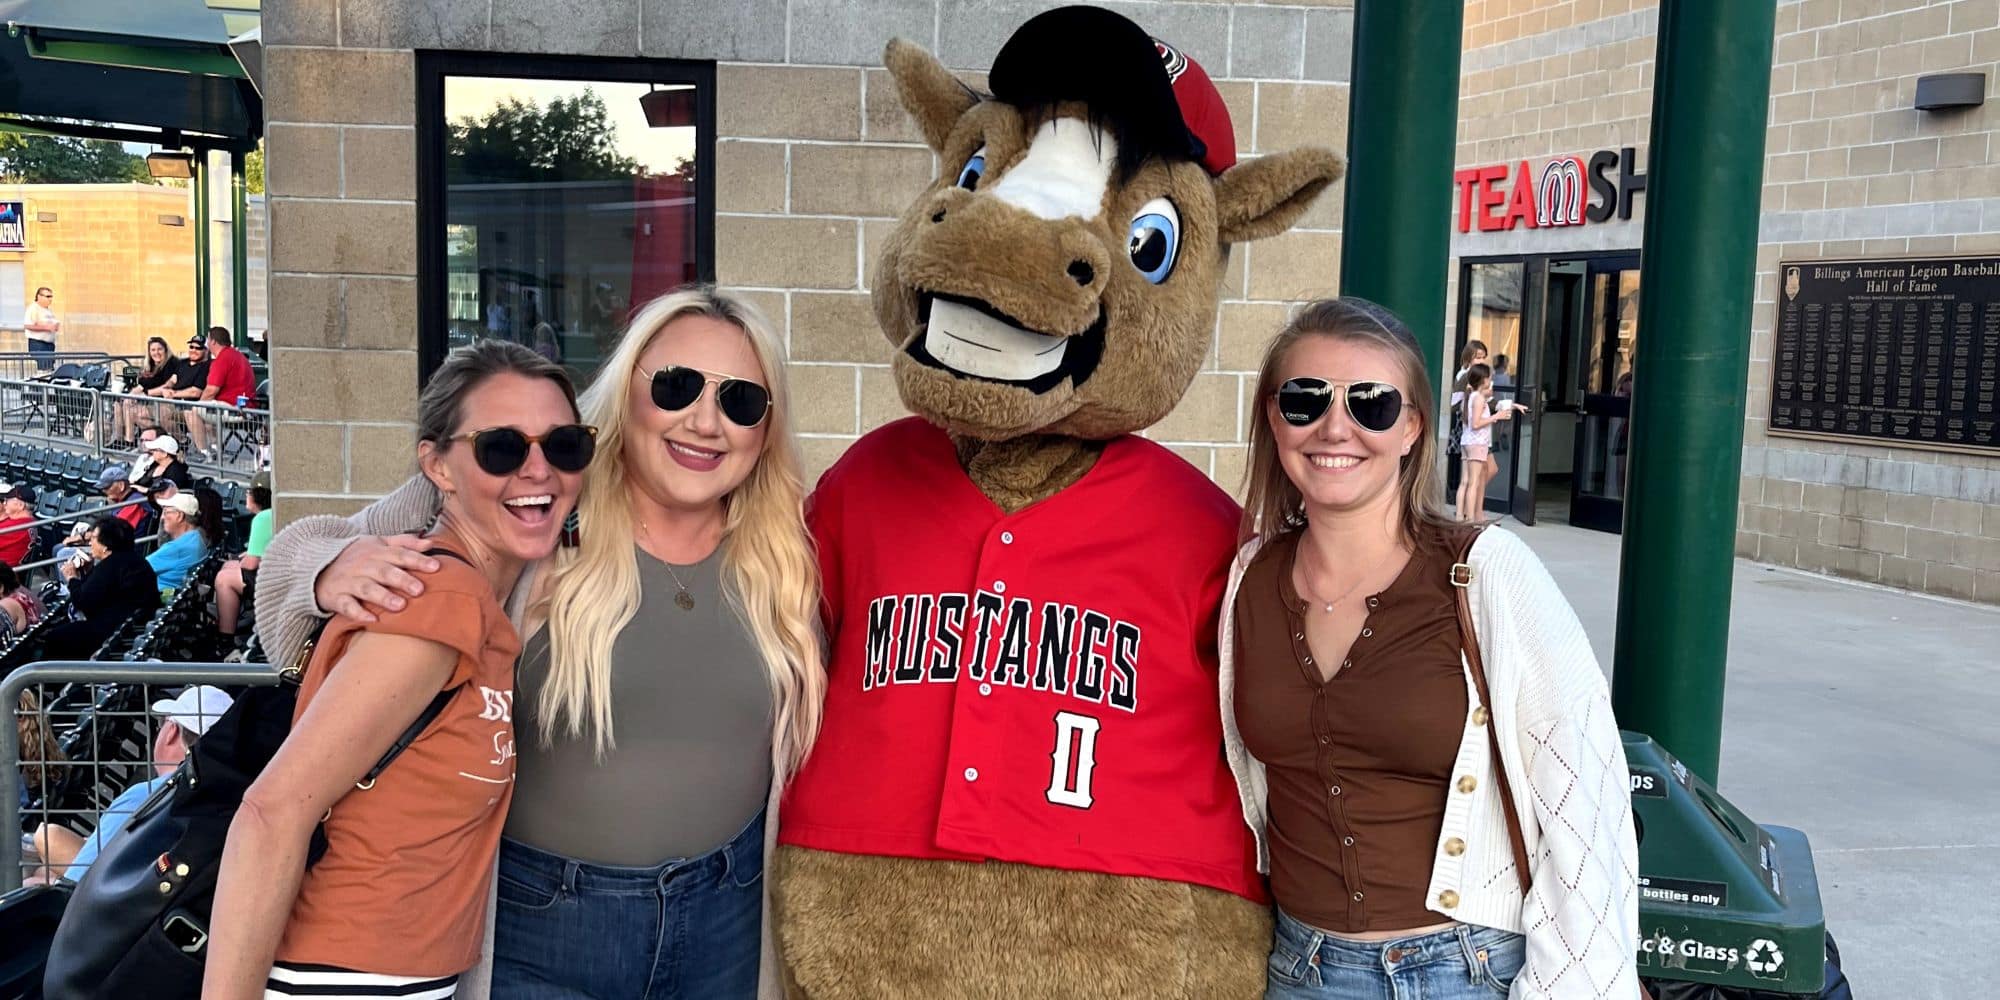 Megan Gill (right) and friends take time out to enjoy a minor league baseball game in Billings, Montana. (Photo: Megan Gill)